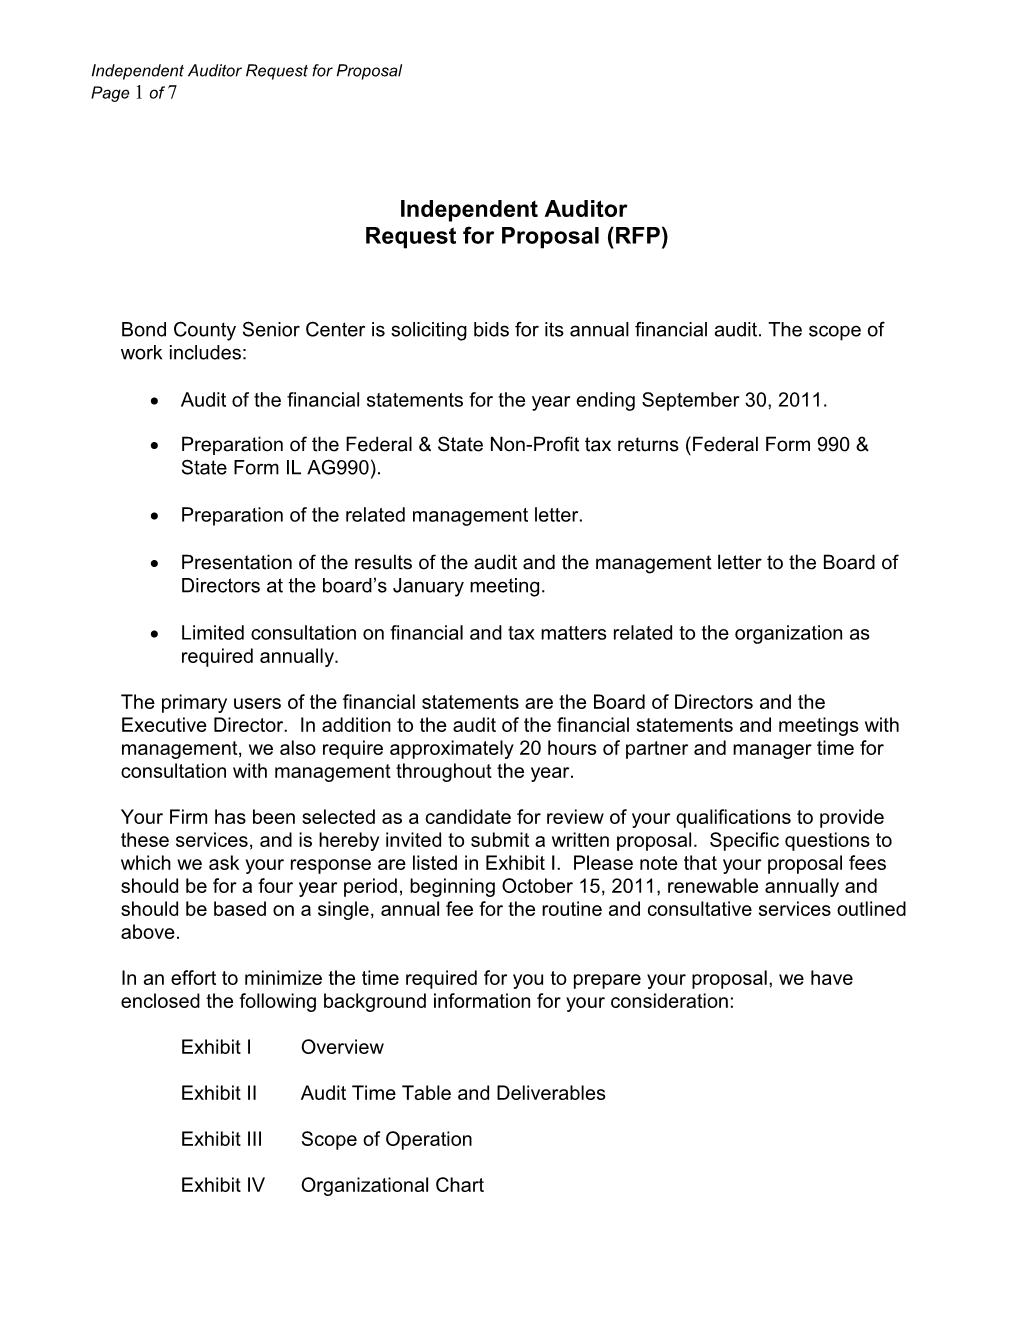 Independent Auditor Request for Proposal